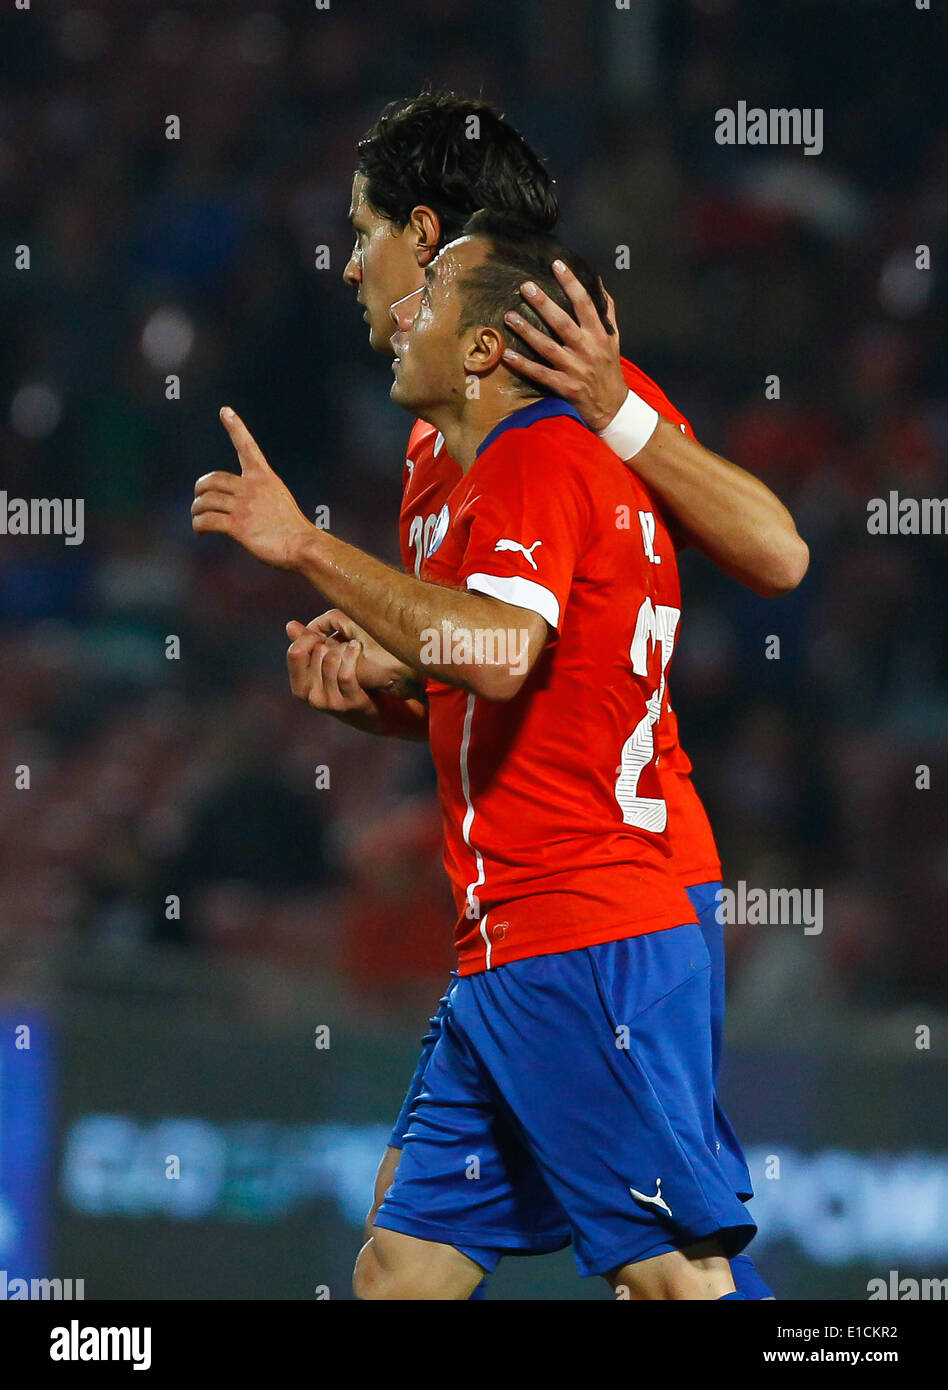 Santiago, Chile. 30th May, 2014. Marcelo Diaz (front) of Chile celebrates his goal during their international friendly soccer match against Egypt in Santiago City, capital of Chile, on May 30, 2014. © Stringer/Xinhua/Alamy Live News Stock Photo